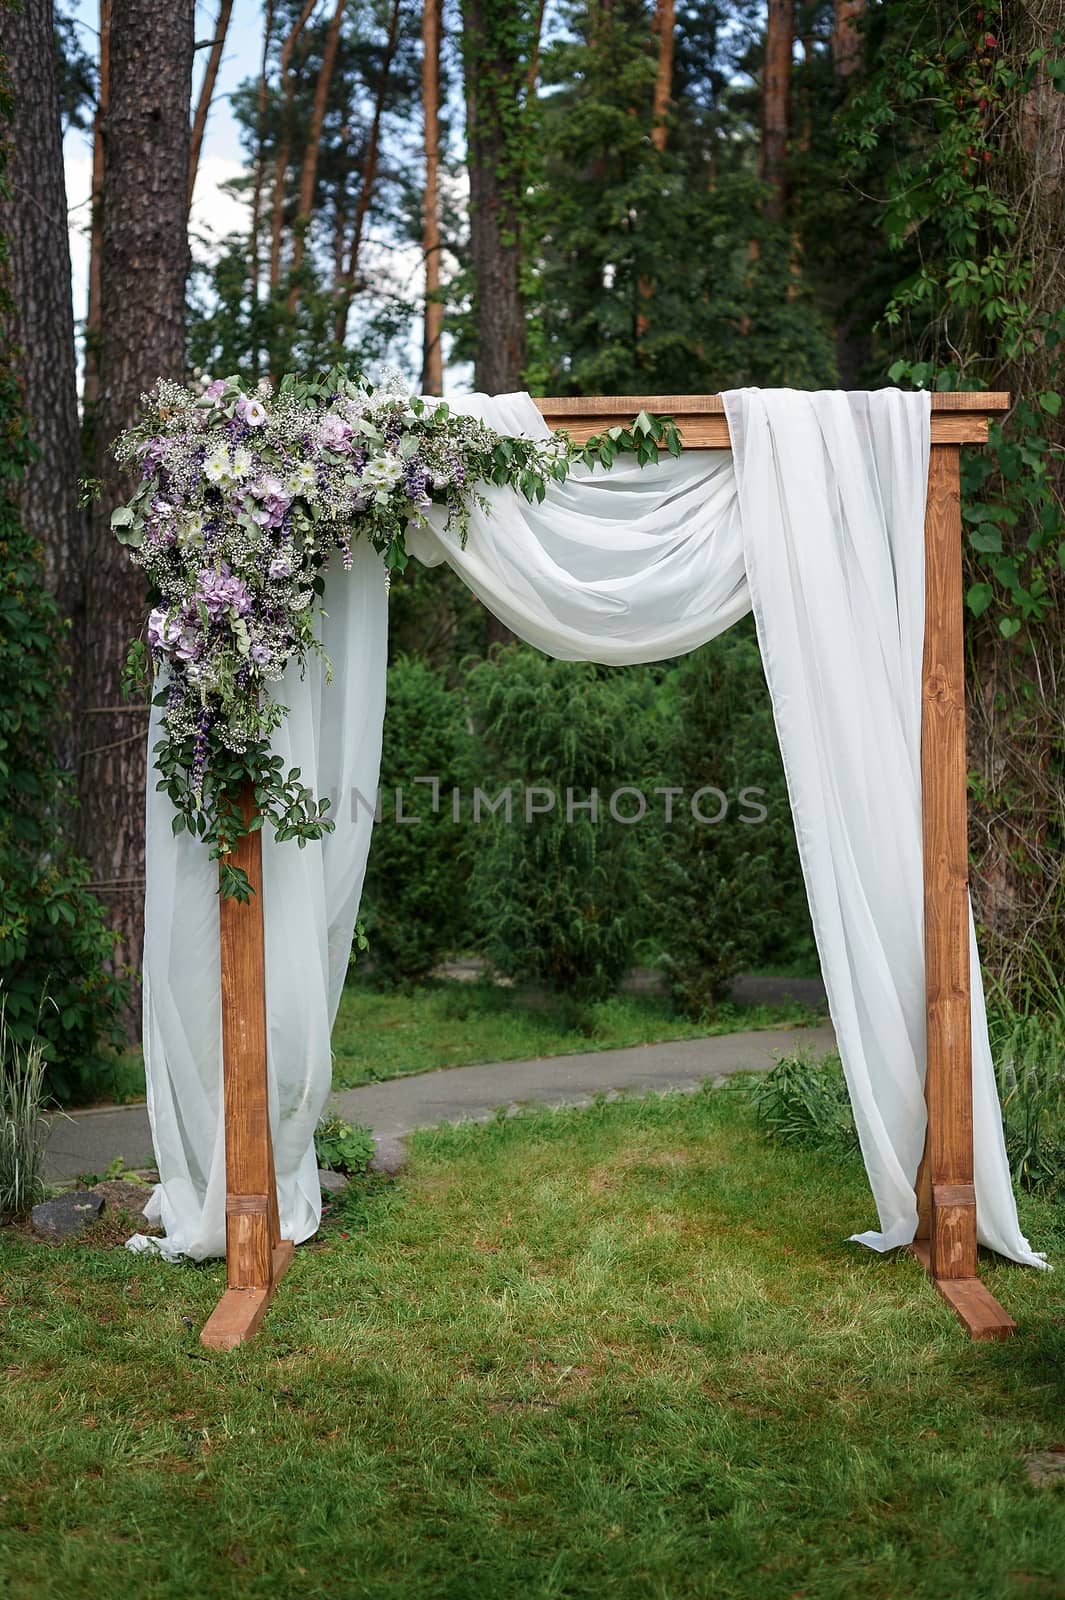 Beautiful wedding arch decorated with flowers in the Park.